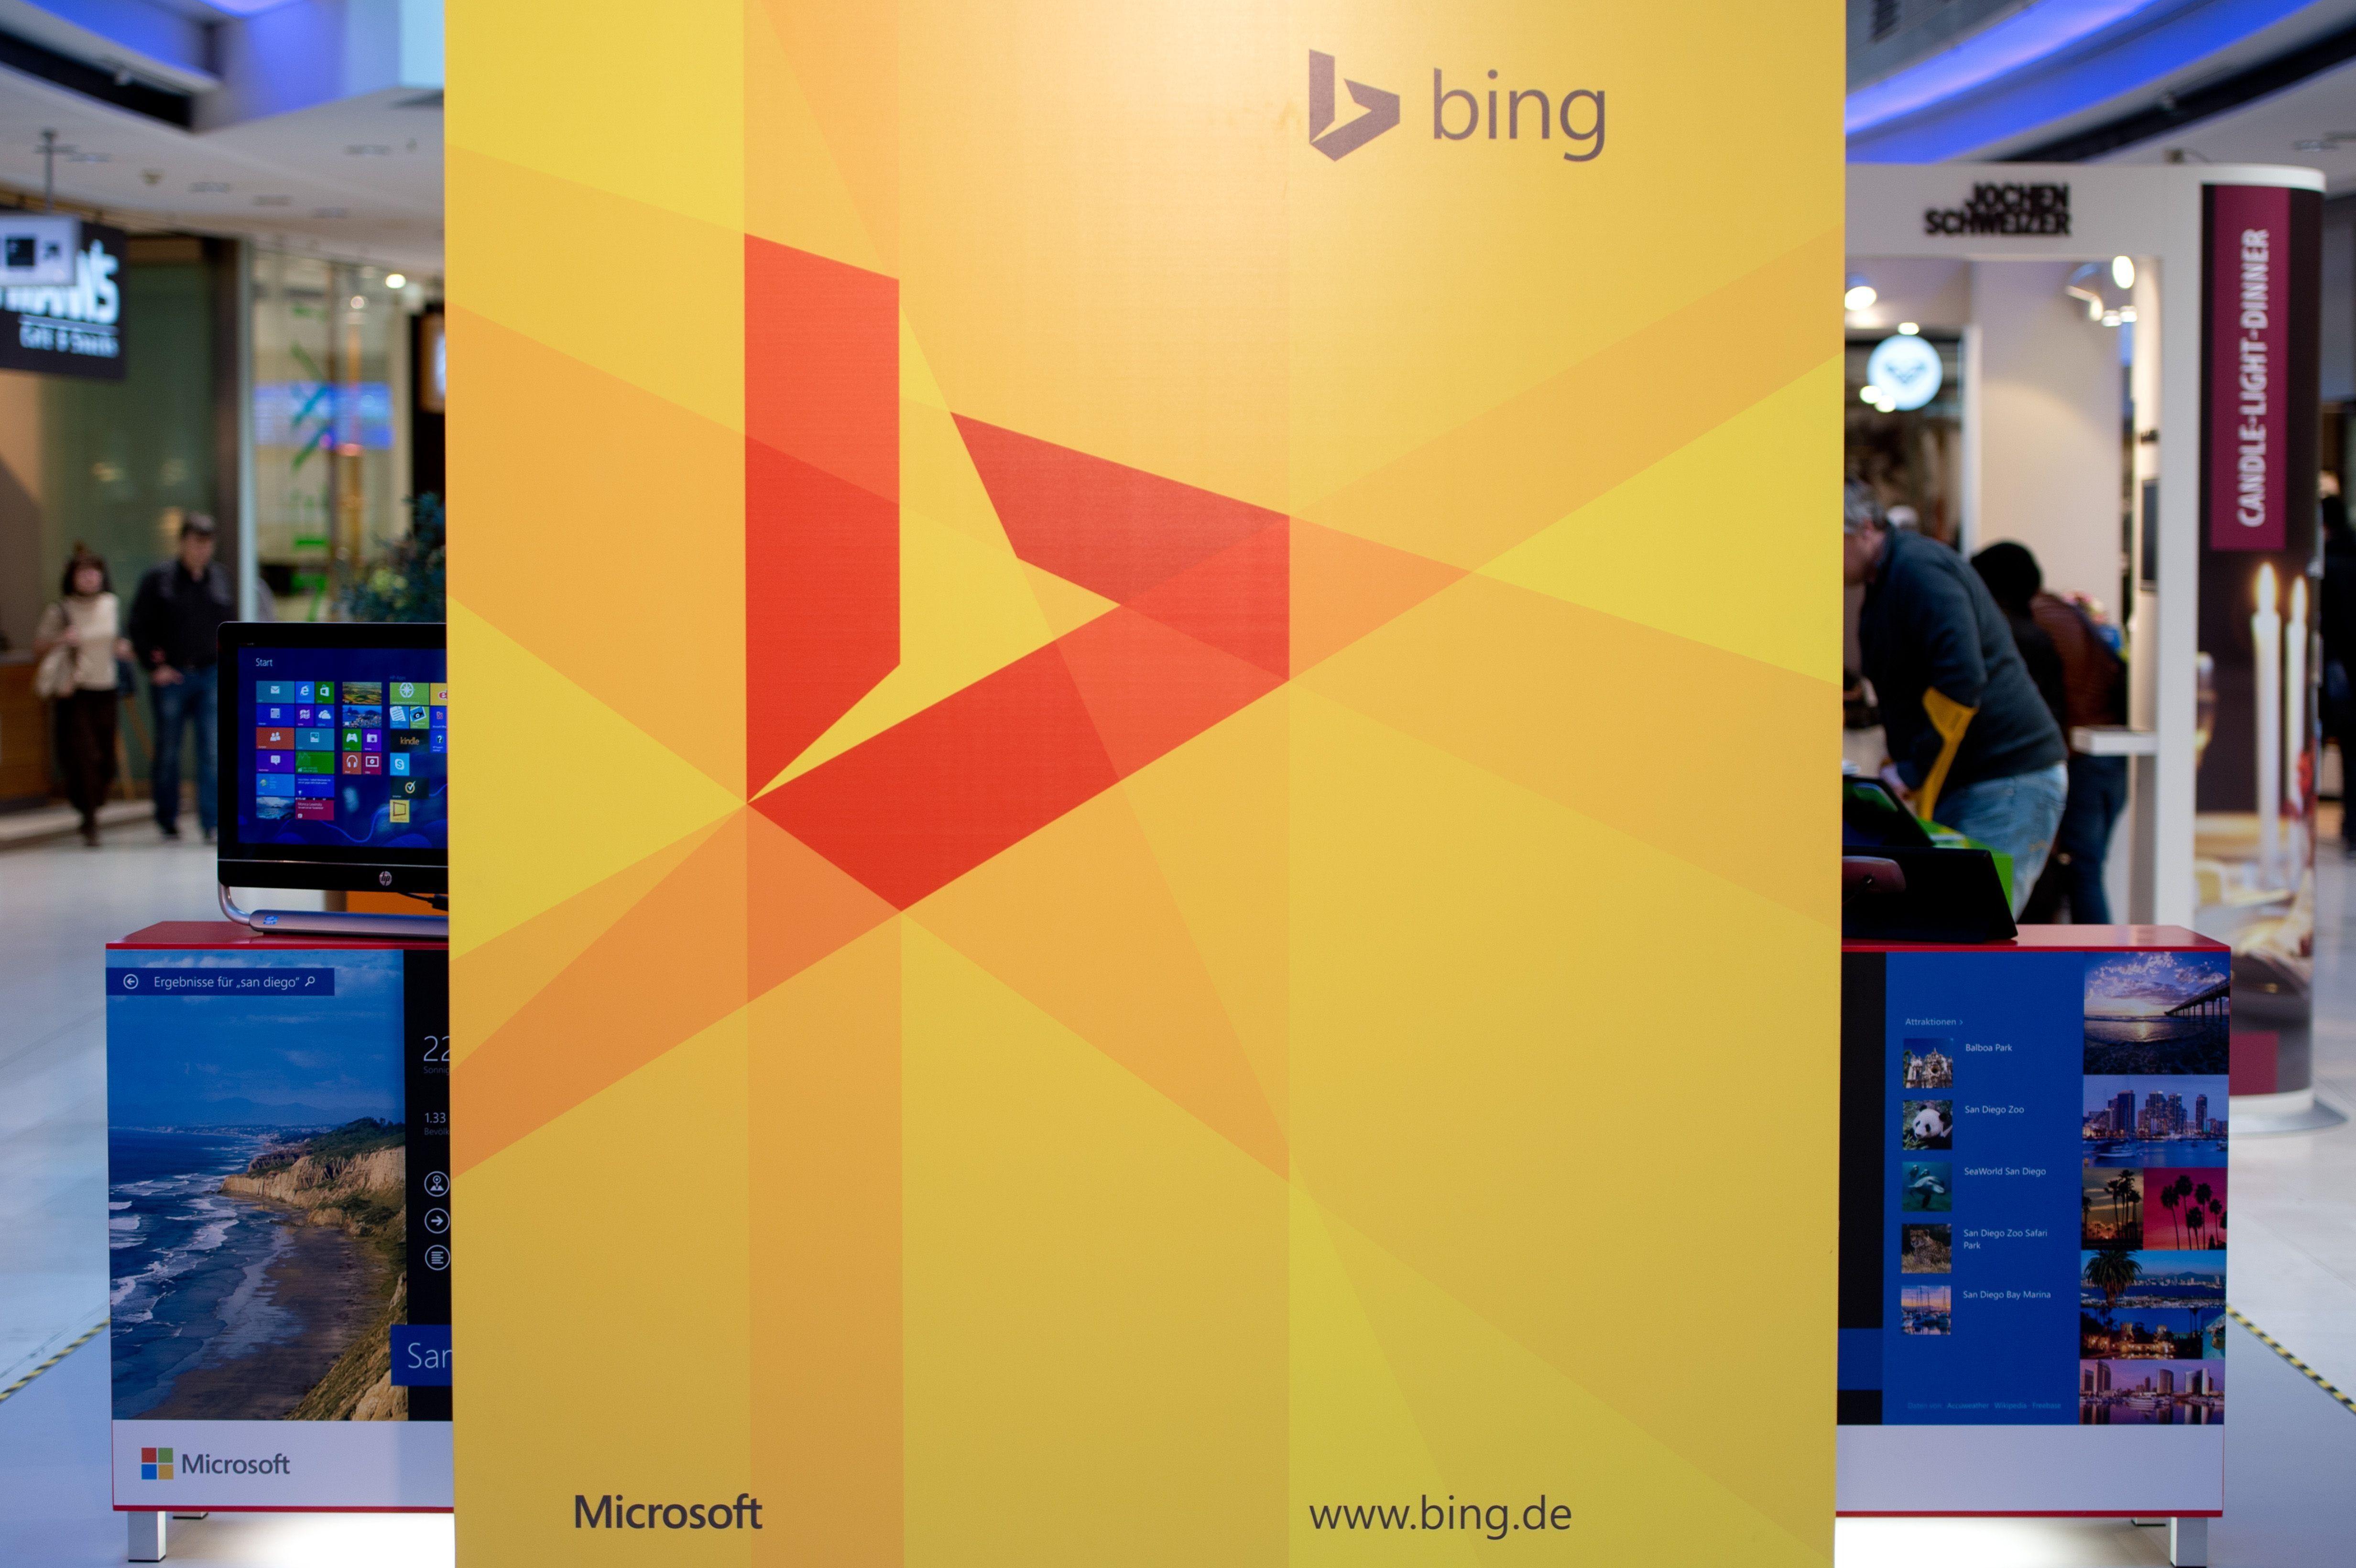 Bing Product Search Logo - Microsoft's Bing Search Engine Is Finally Proiftable | Time